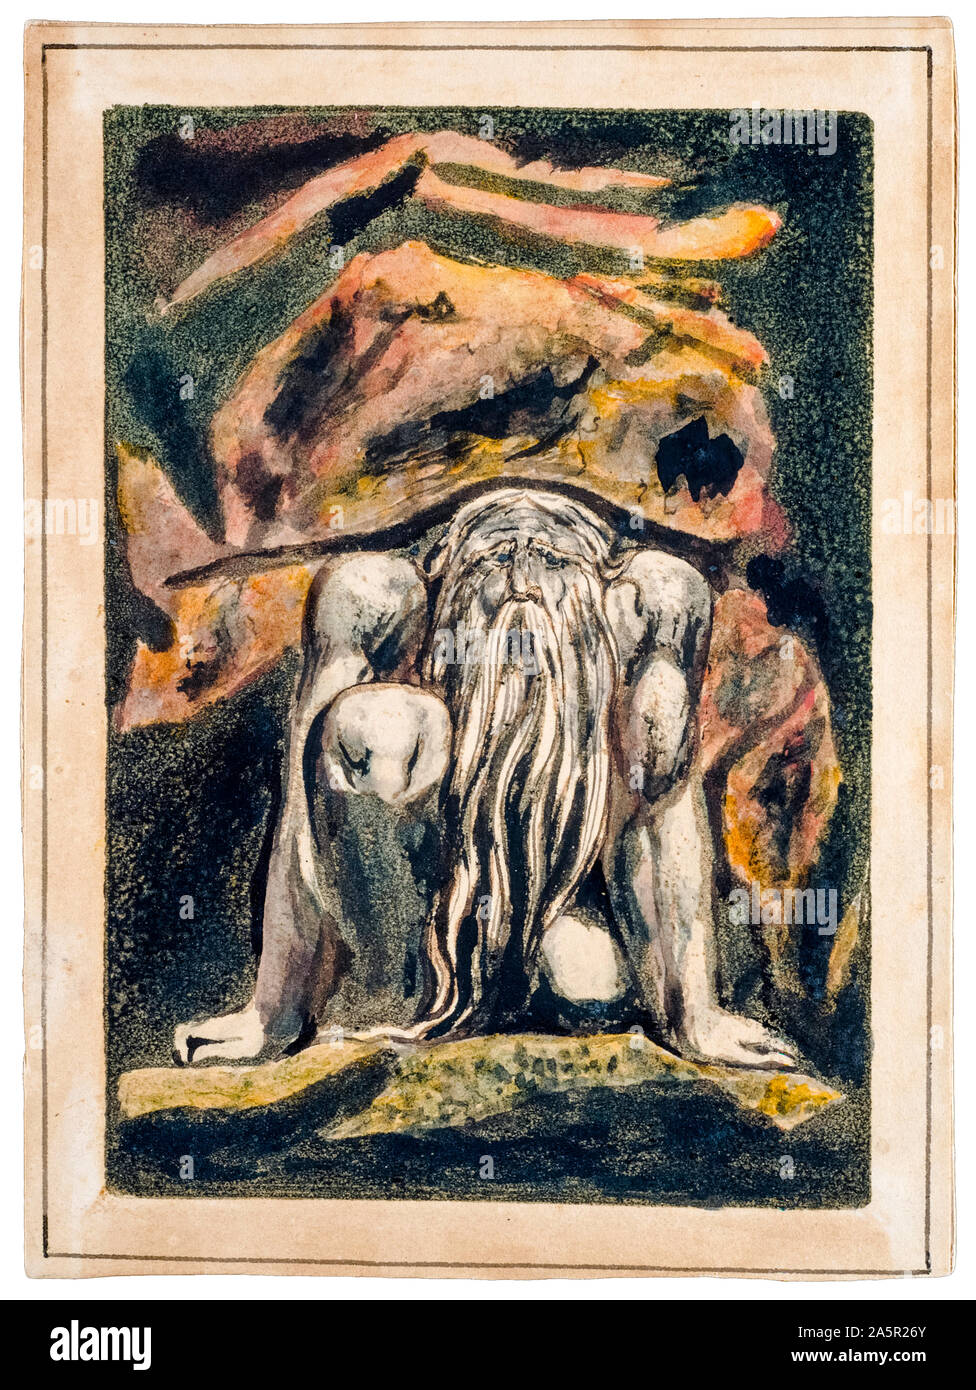 William Blake, Urizen, painting, relief etching, hand coloured, illustration, 1794-1796 Stock Photo